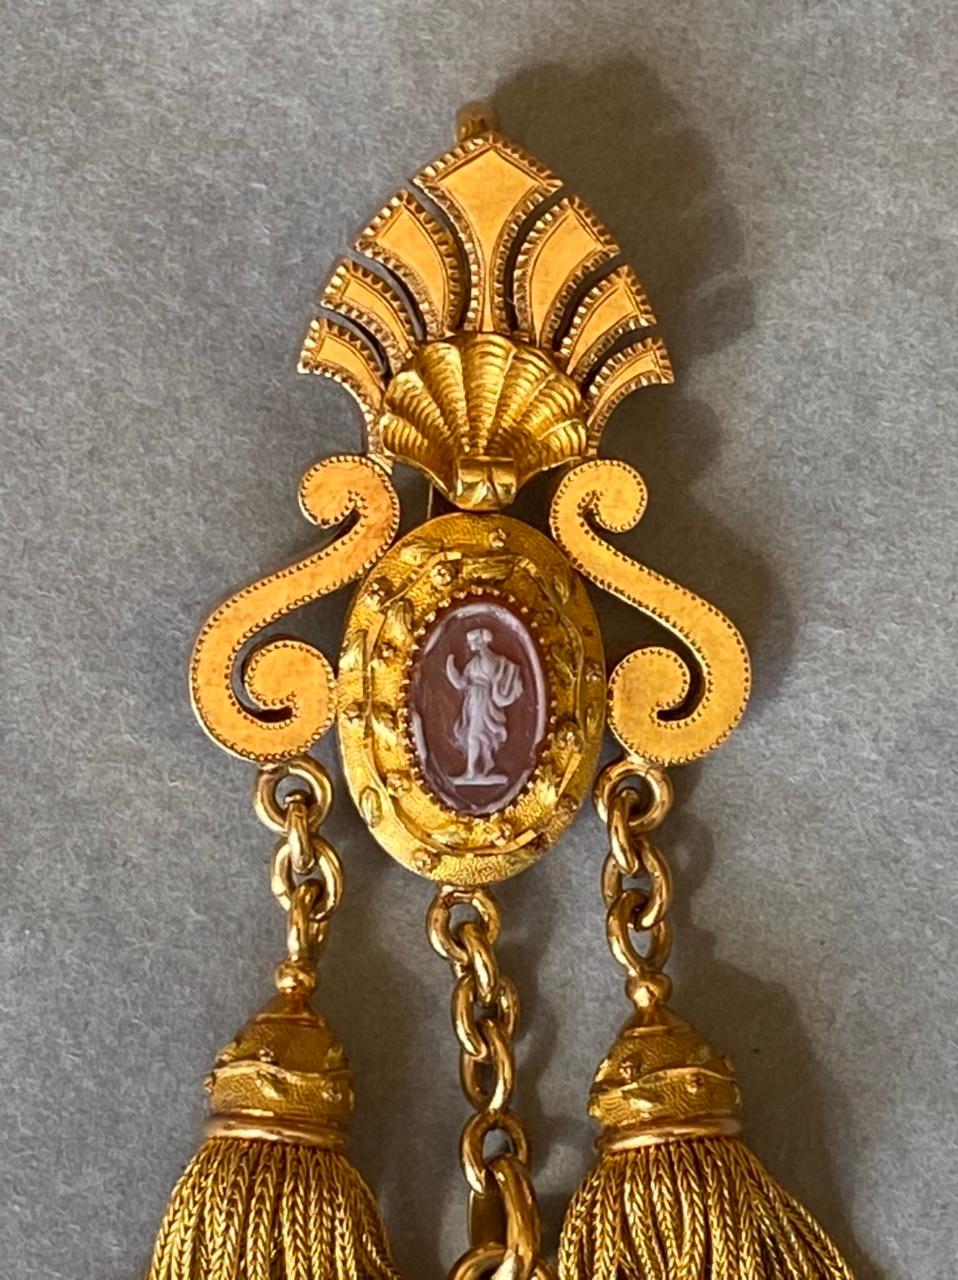 Very beautiful antique locket pendant, made in France circa 1870.

Made in multiple colors of 18k gold, mark for gold: the eagle head.
Dimensions: 7.5 cm height (3 inches), 2.5 cm width (1 inche).
The cameo are in agate stone.
The locket opens and